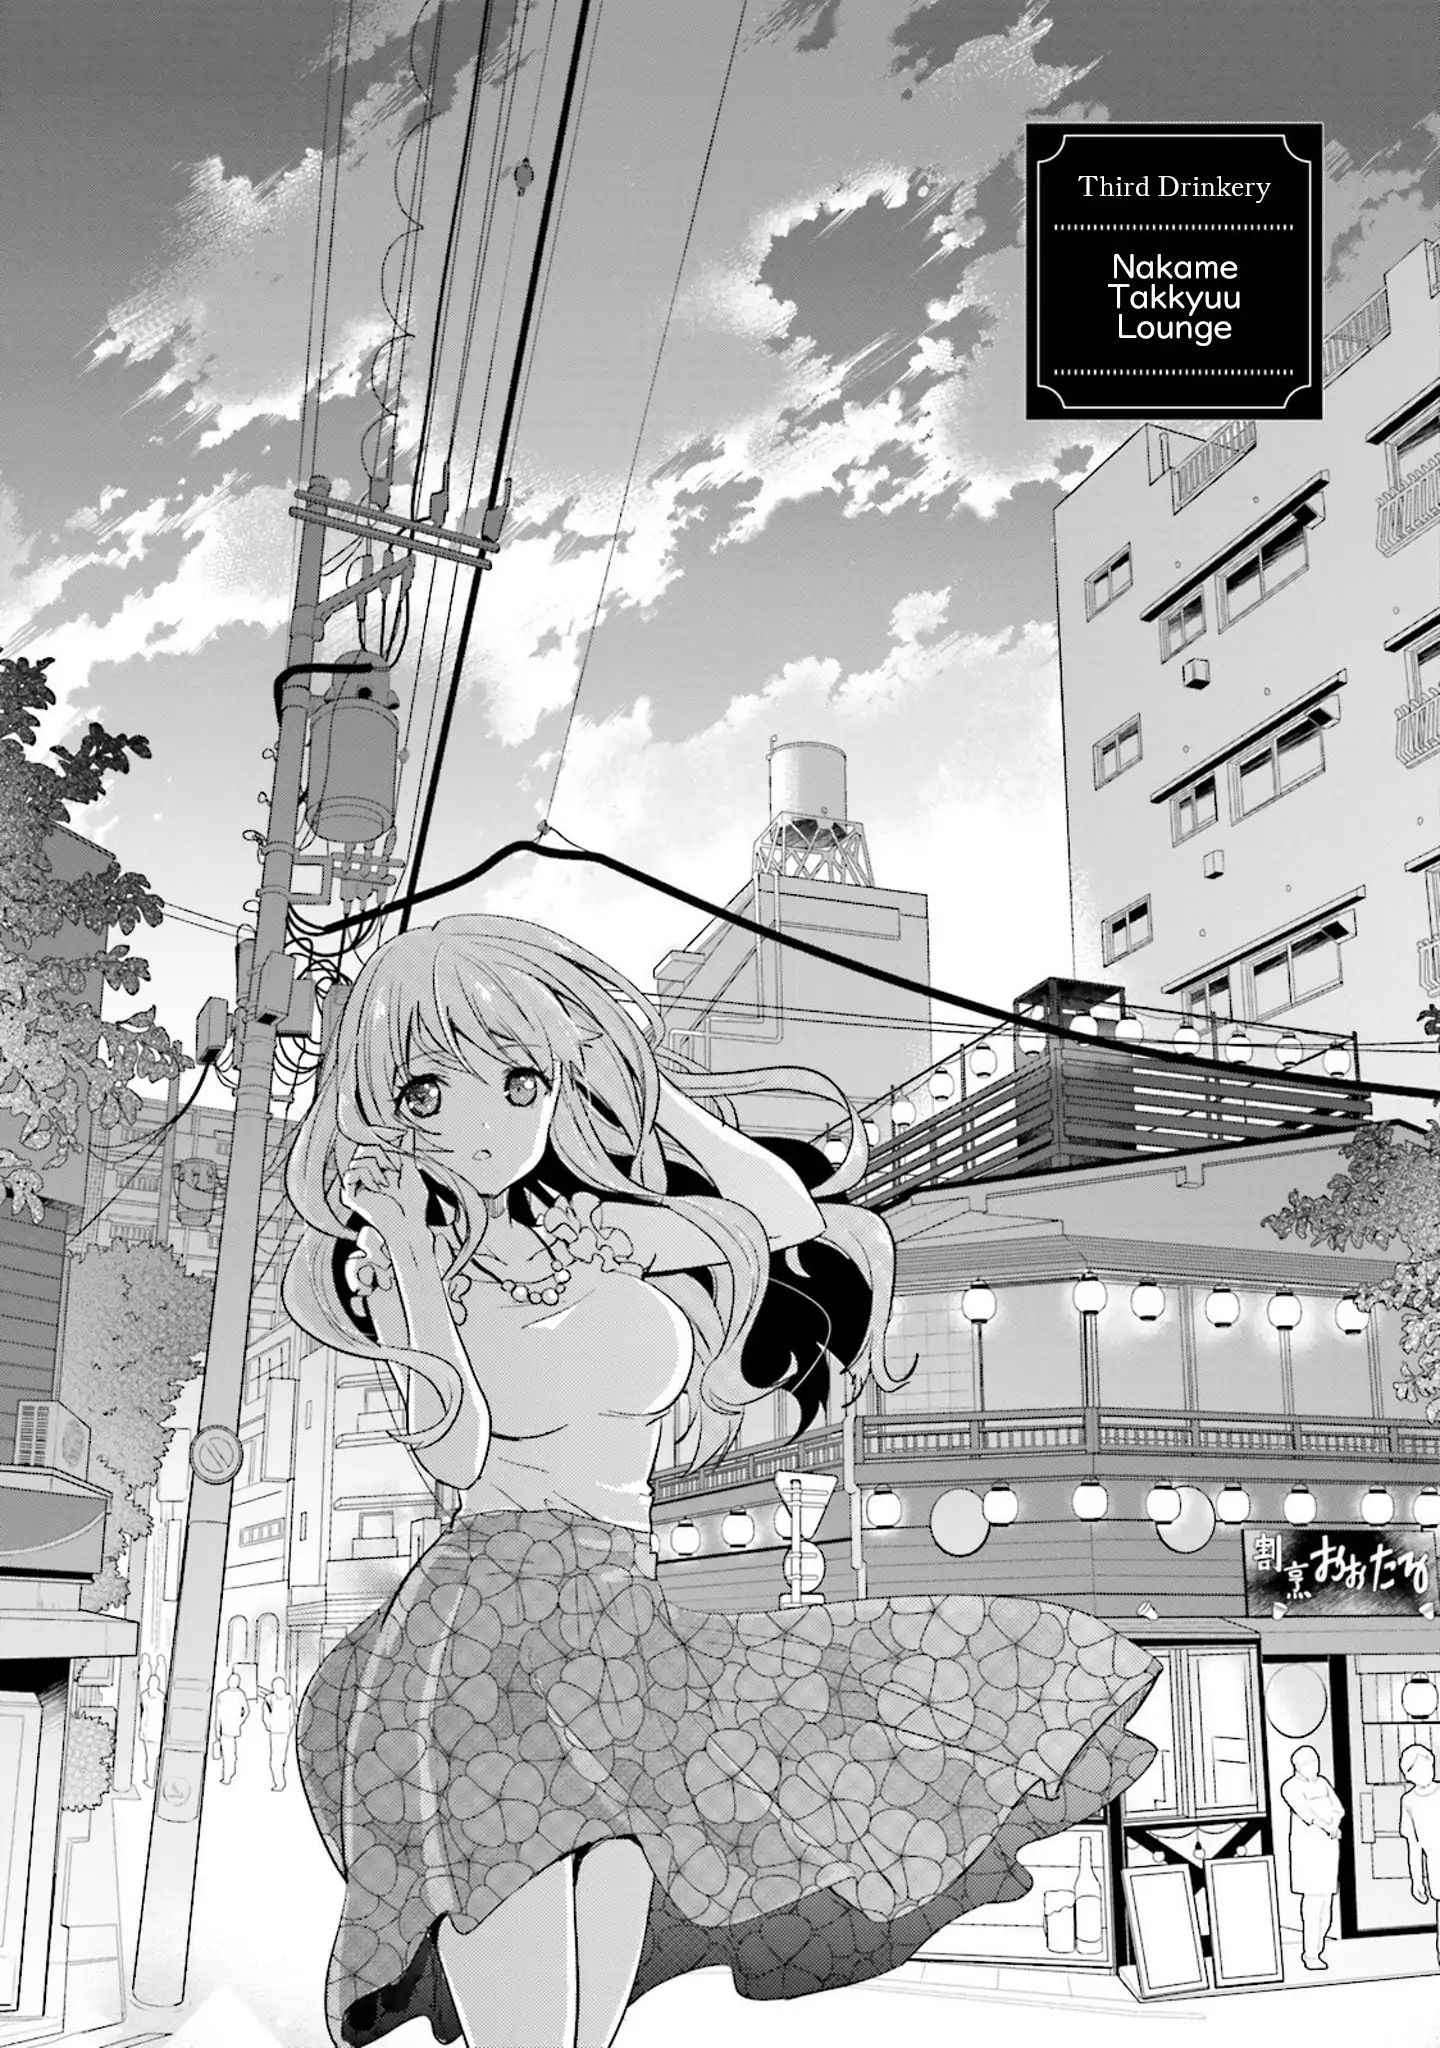 Do You Like Drinking Alcochol With Beautiful Woman? Vol.1 Chapter 3: Nakame Takkyuu Lounge - Picture 2